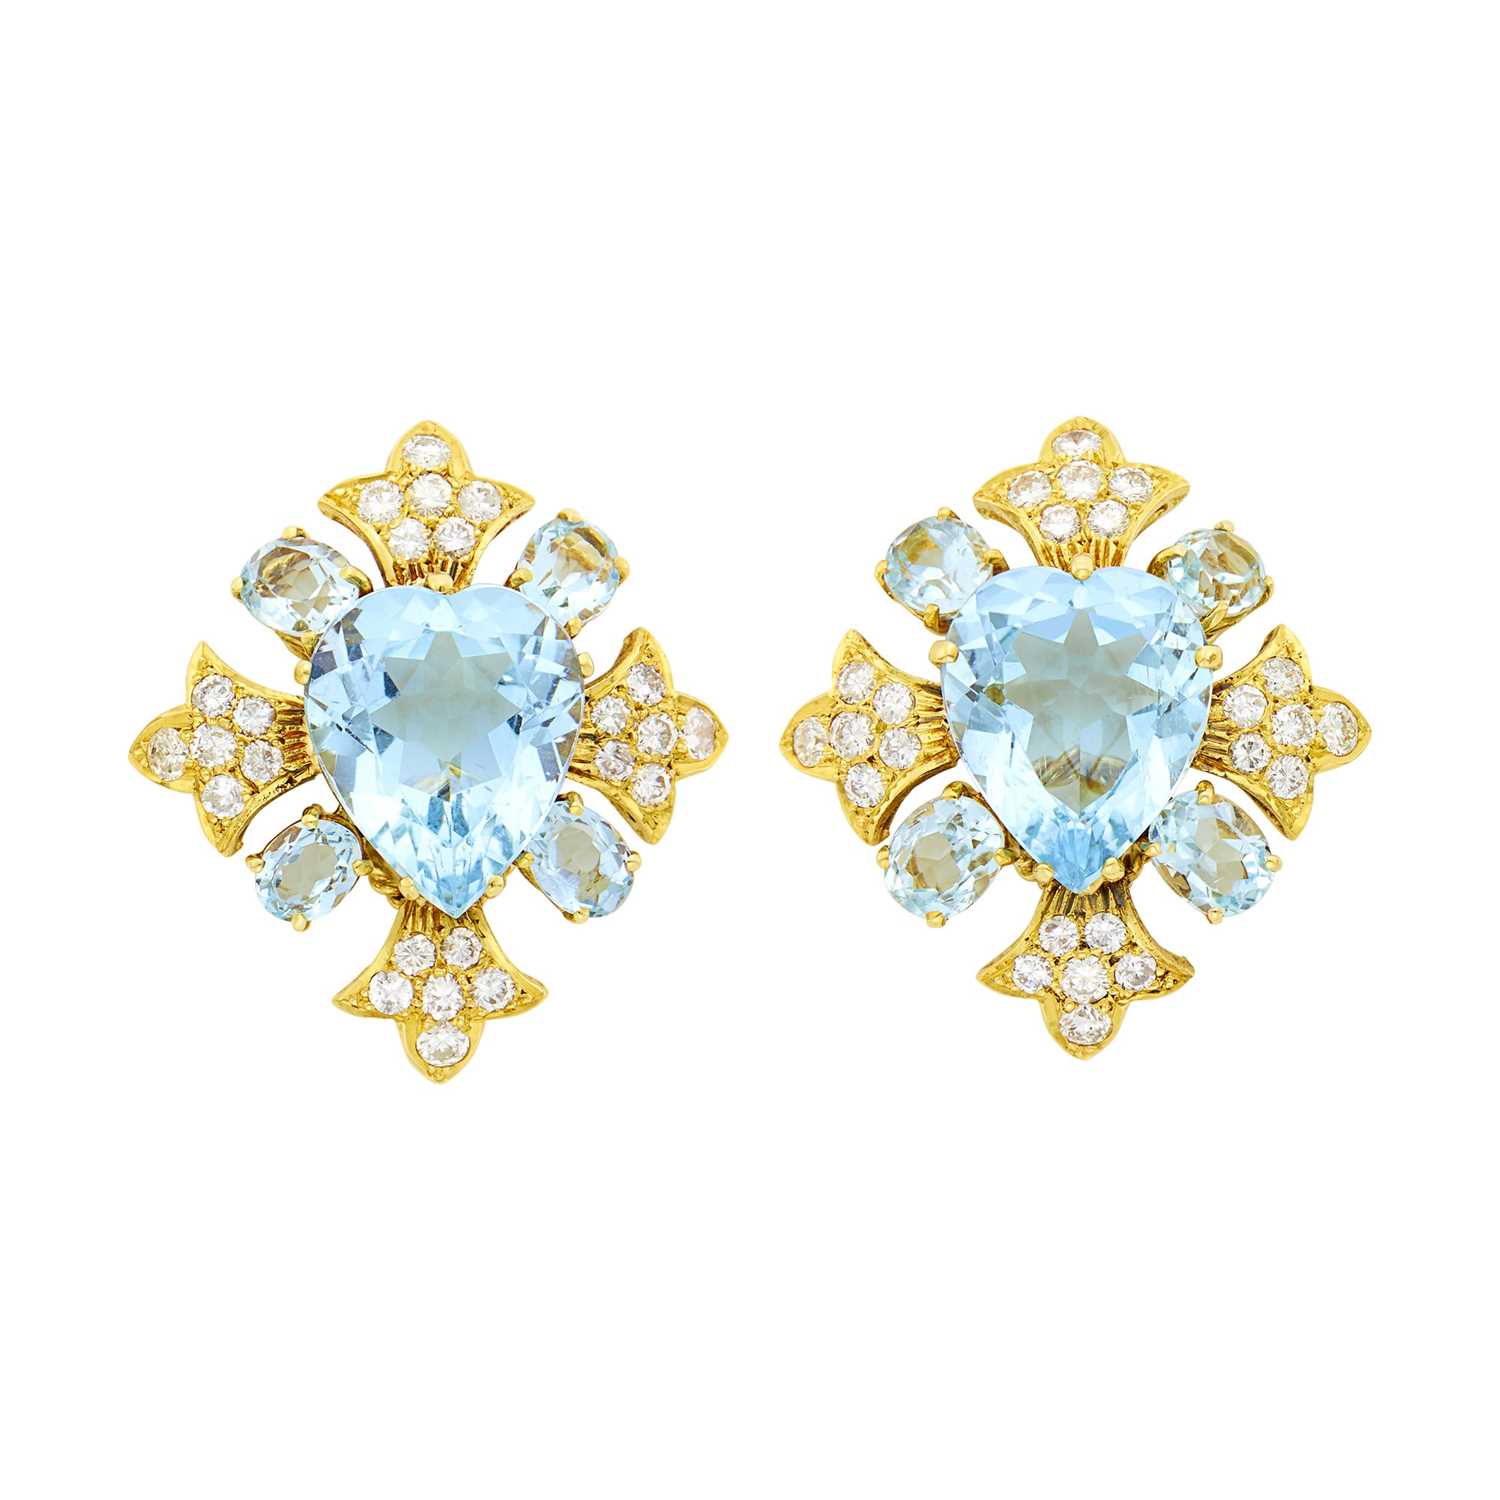 Lot 1057 - Pair of Gold, Aquamarine and Diamond Earclips